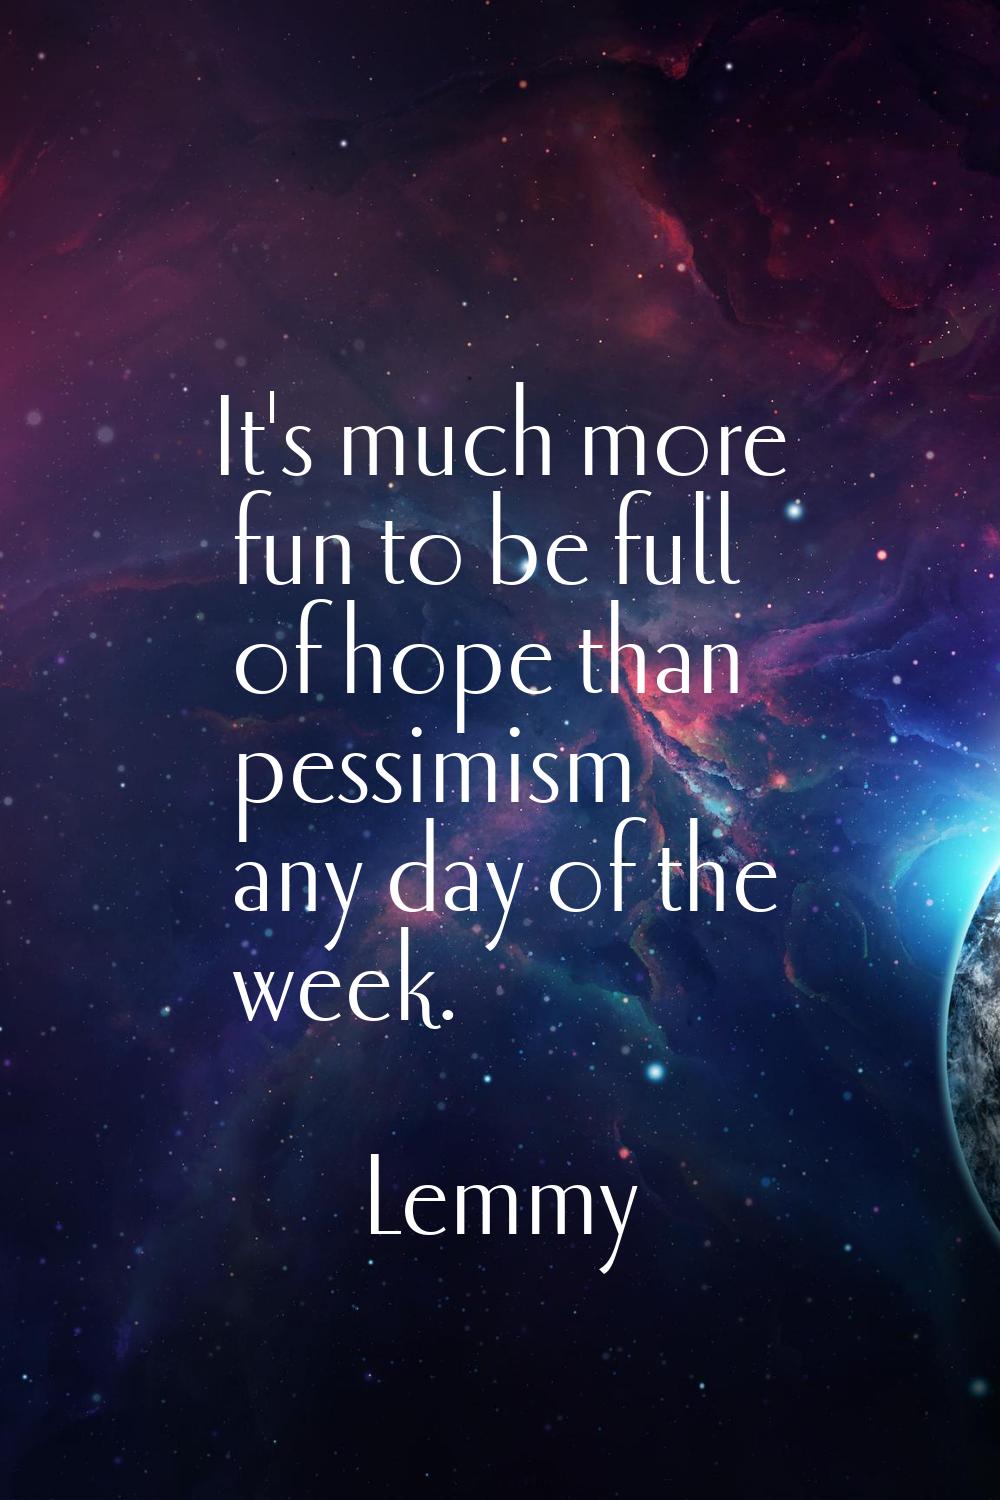 It's much more fun to be full of hope than pessimism any day of the week.